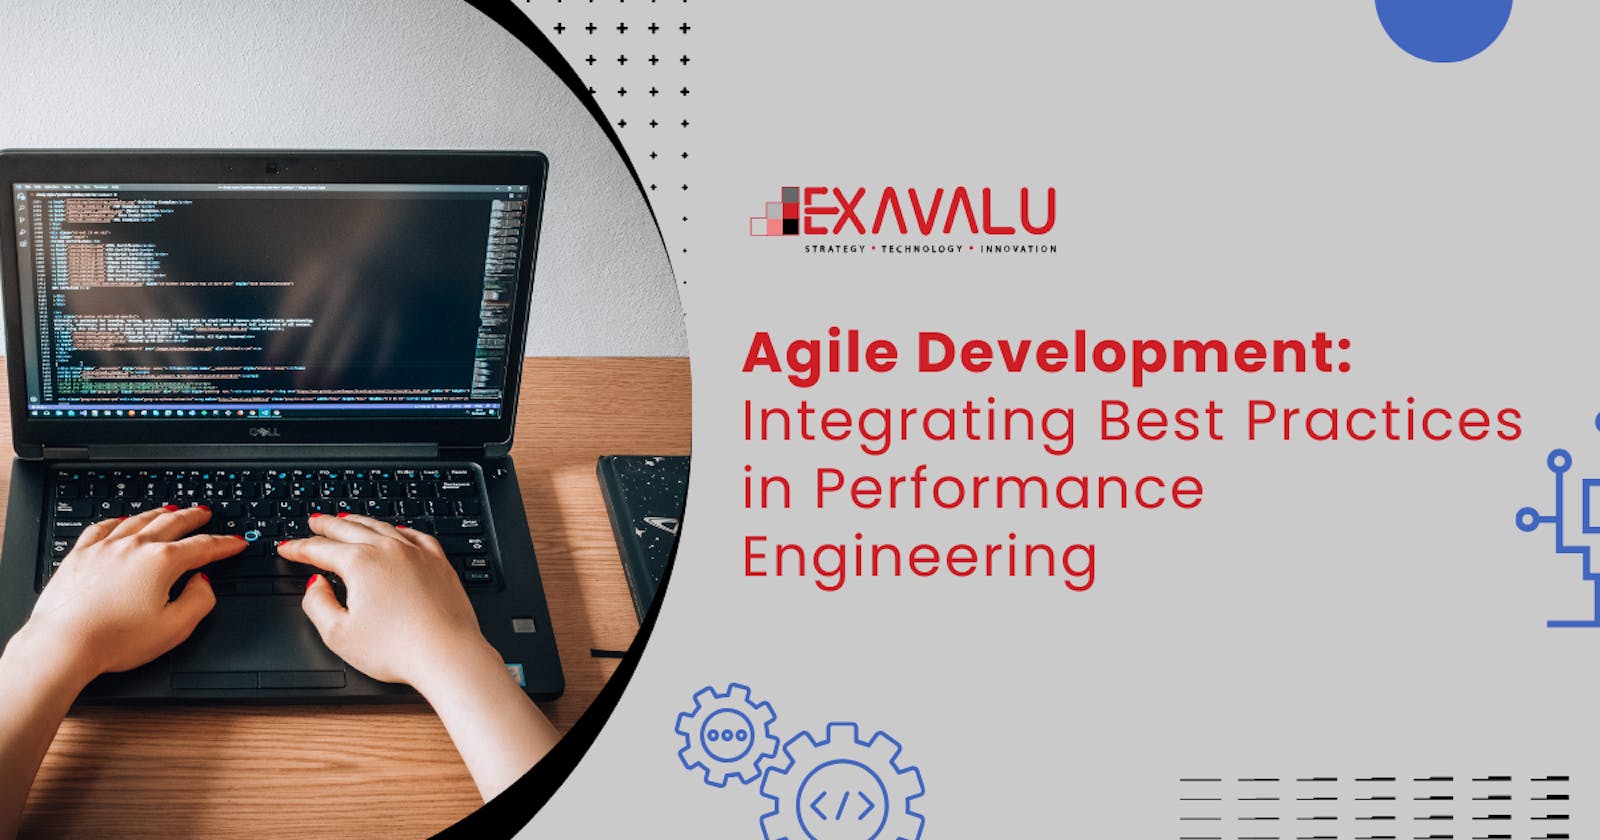 Optimizing Agile Development: Integrating Best Practices and Elevating Performance Engineering